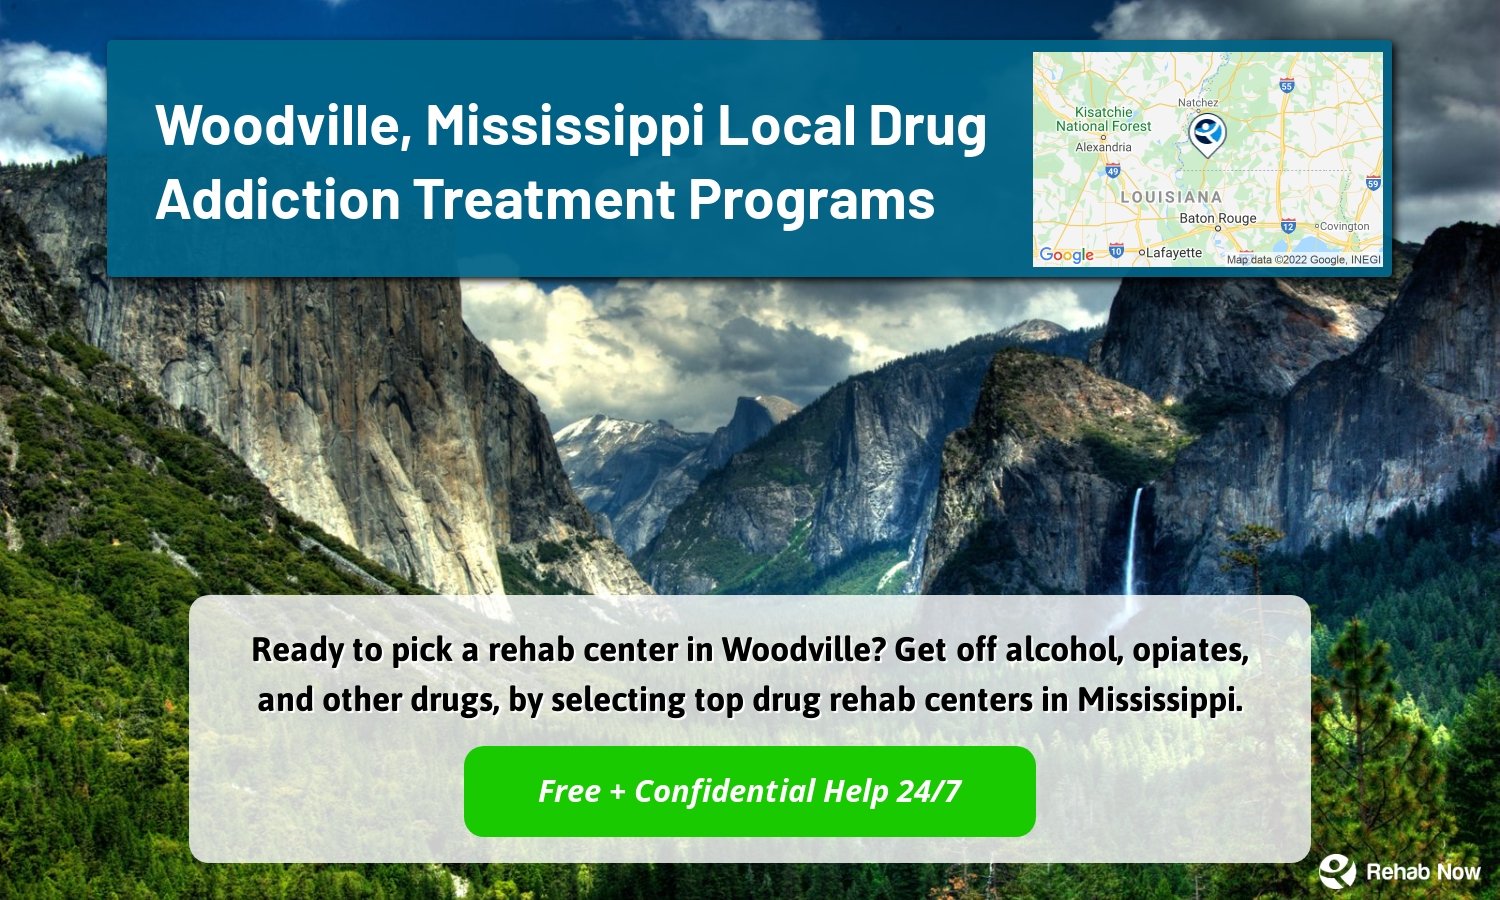 Ready to pick a rehab center in Woodville? Get off alcohol, opiates, and other drugs, by selecting top drug rehab centers in Mississippi.